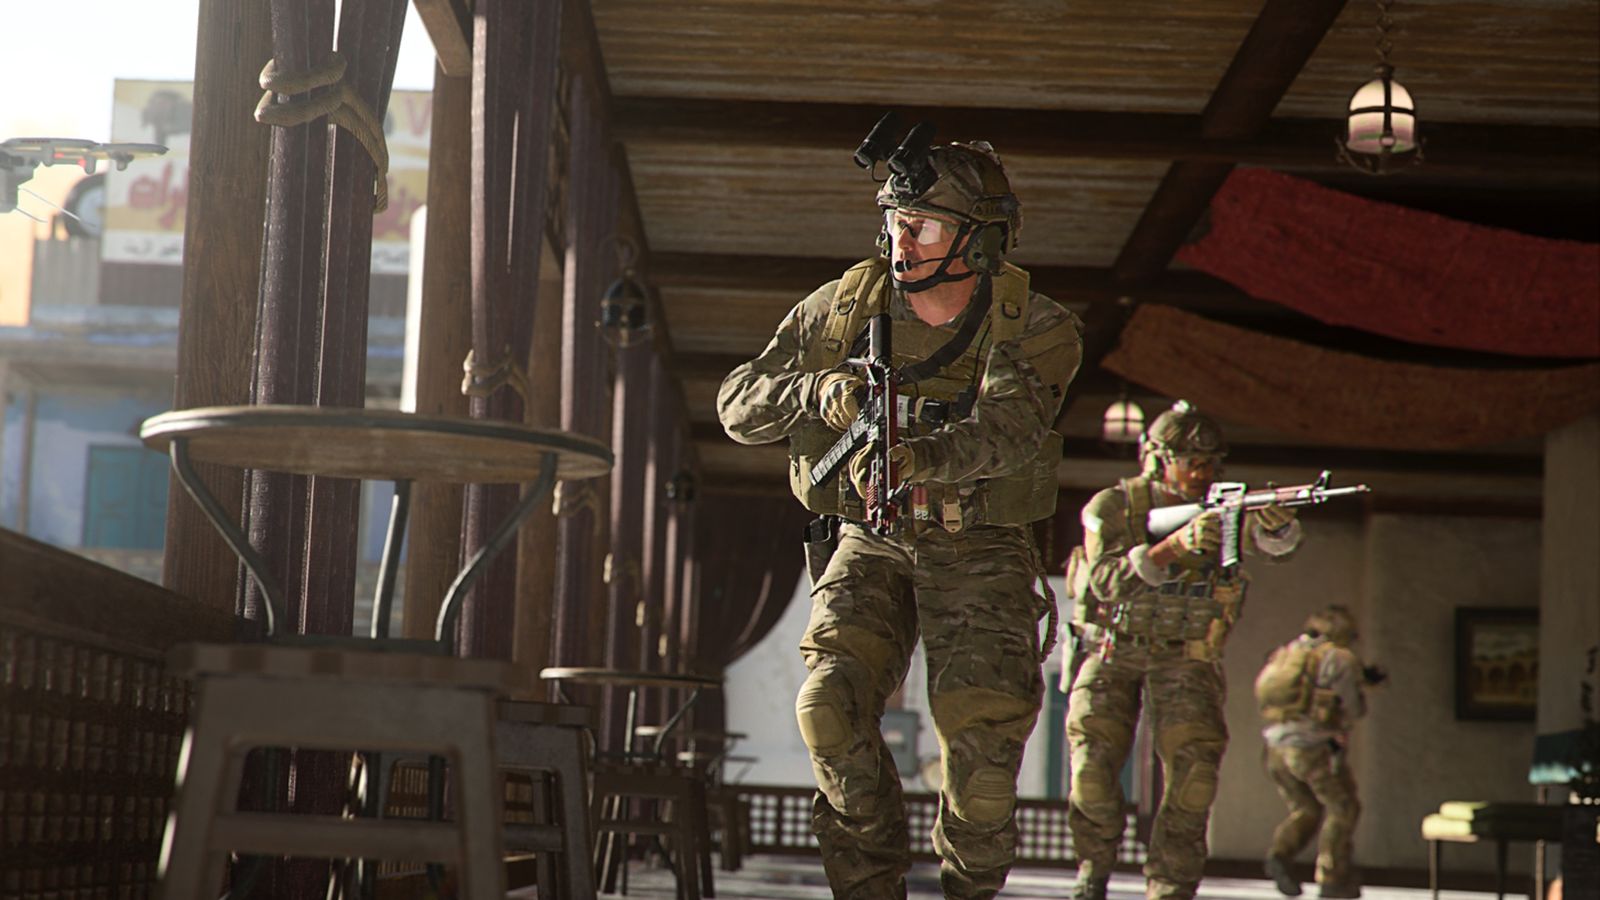 Image showing Modern Warfare 2 players moving through building